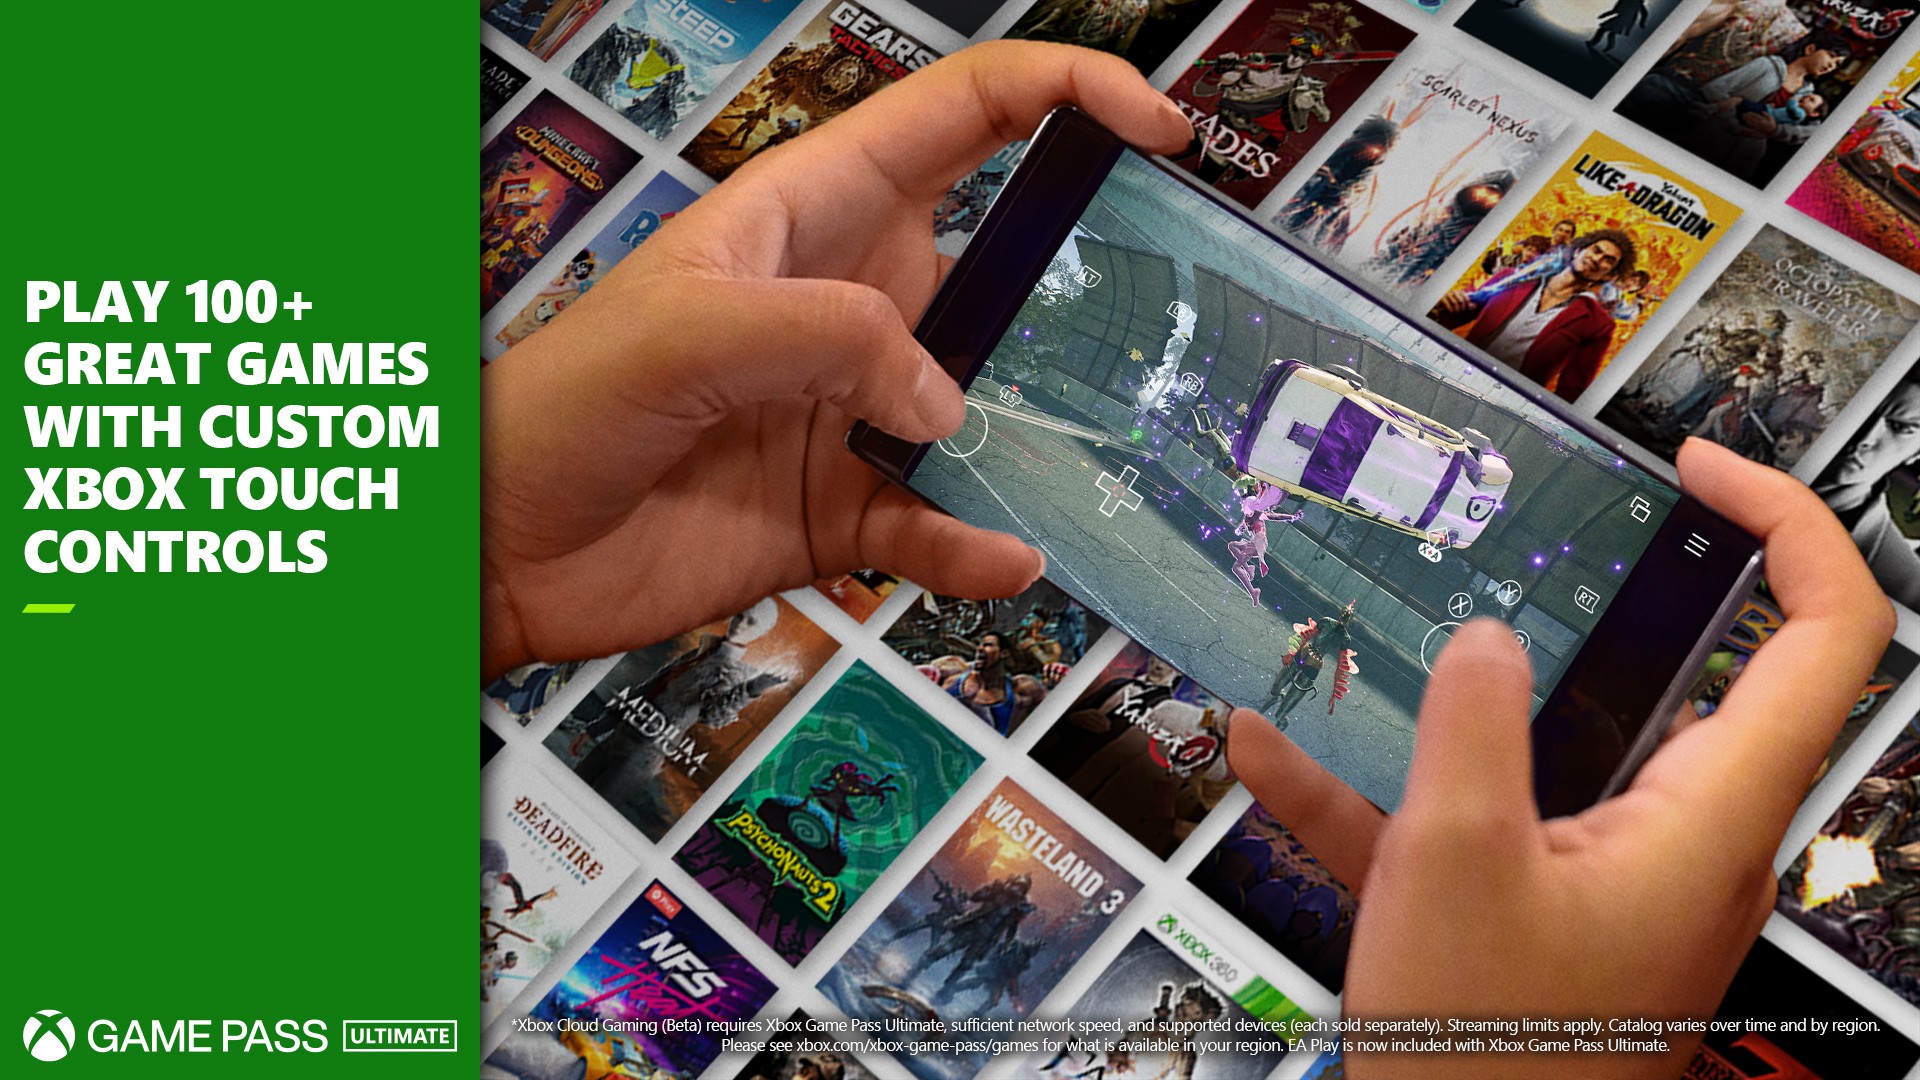 Introducing Xbox Game Pass Ultimate Coming Later this Year - Xbox Wire